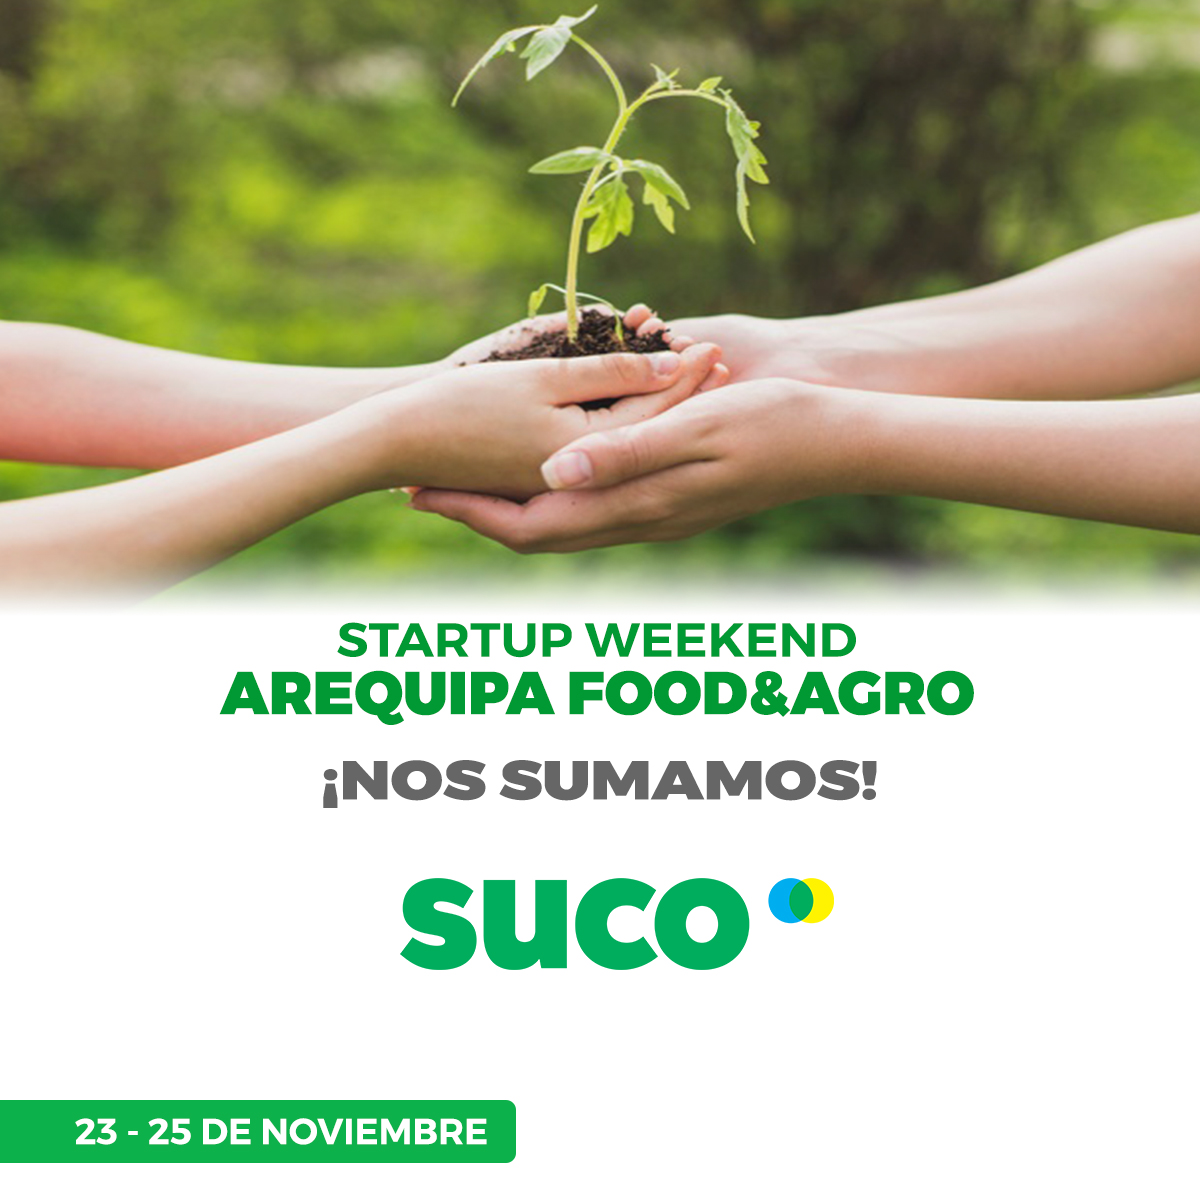 Startup Weekend Arequipa food&agro